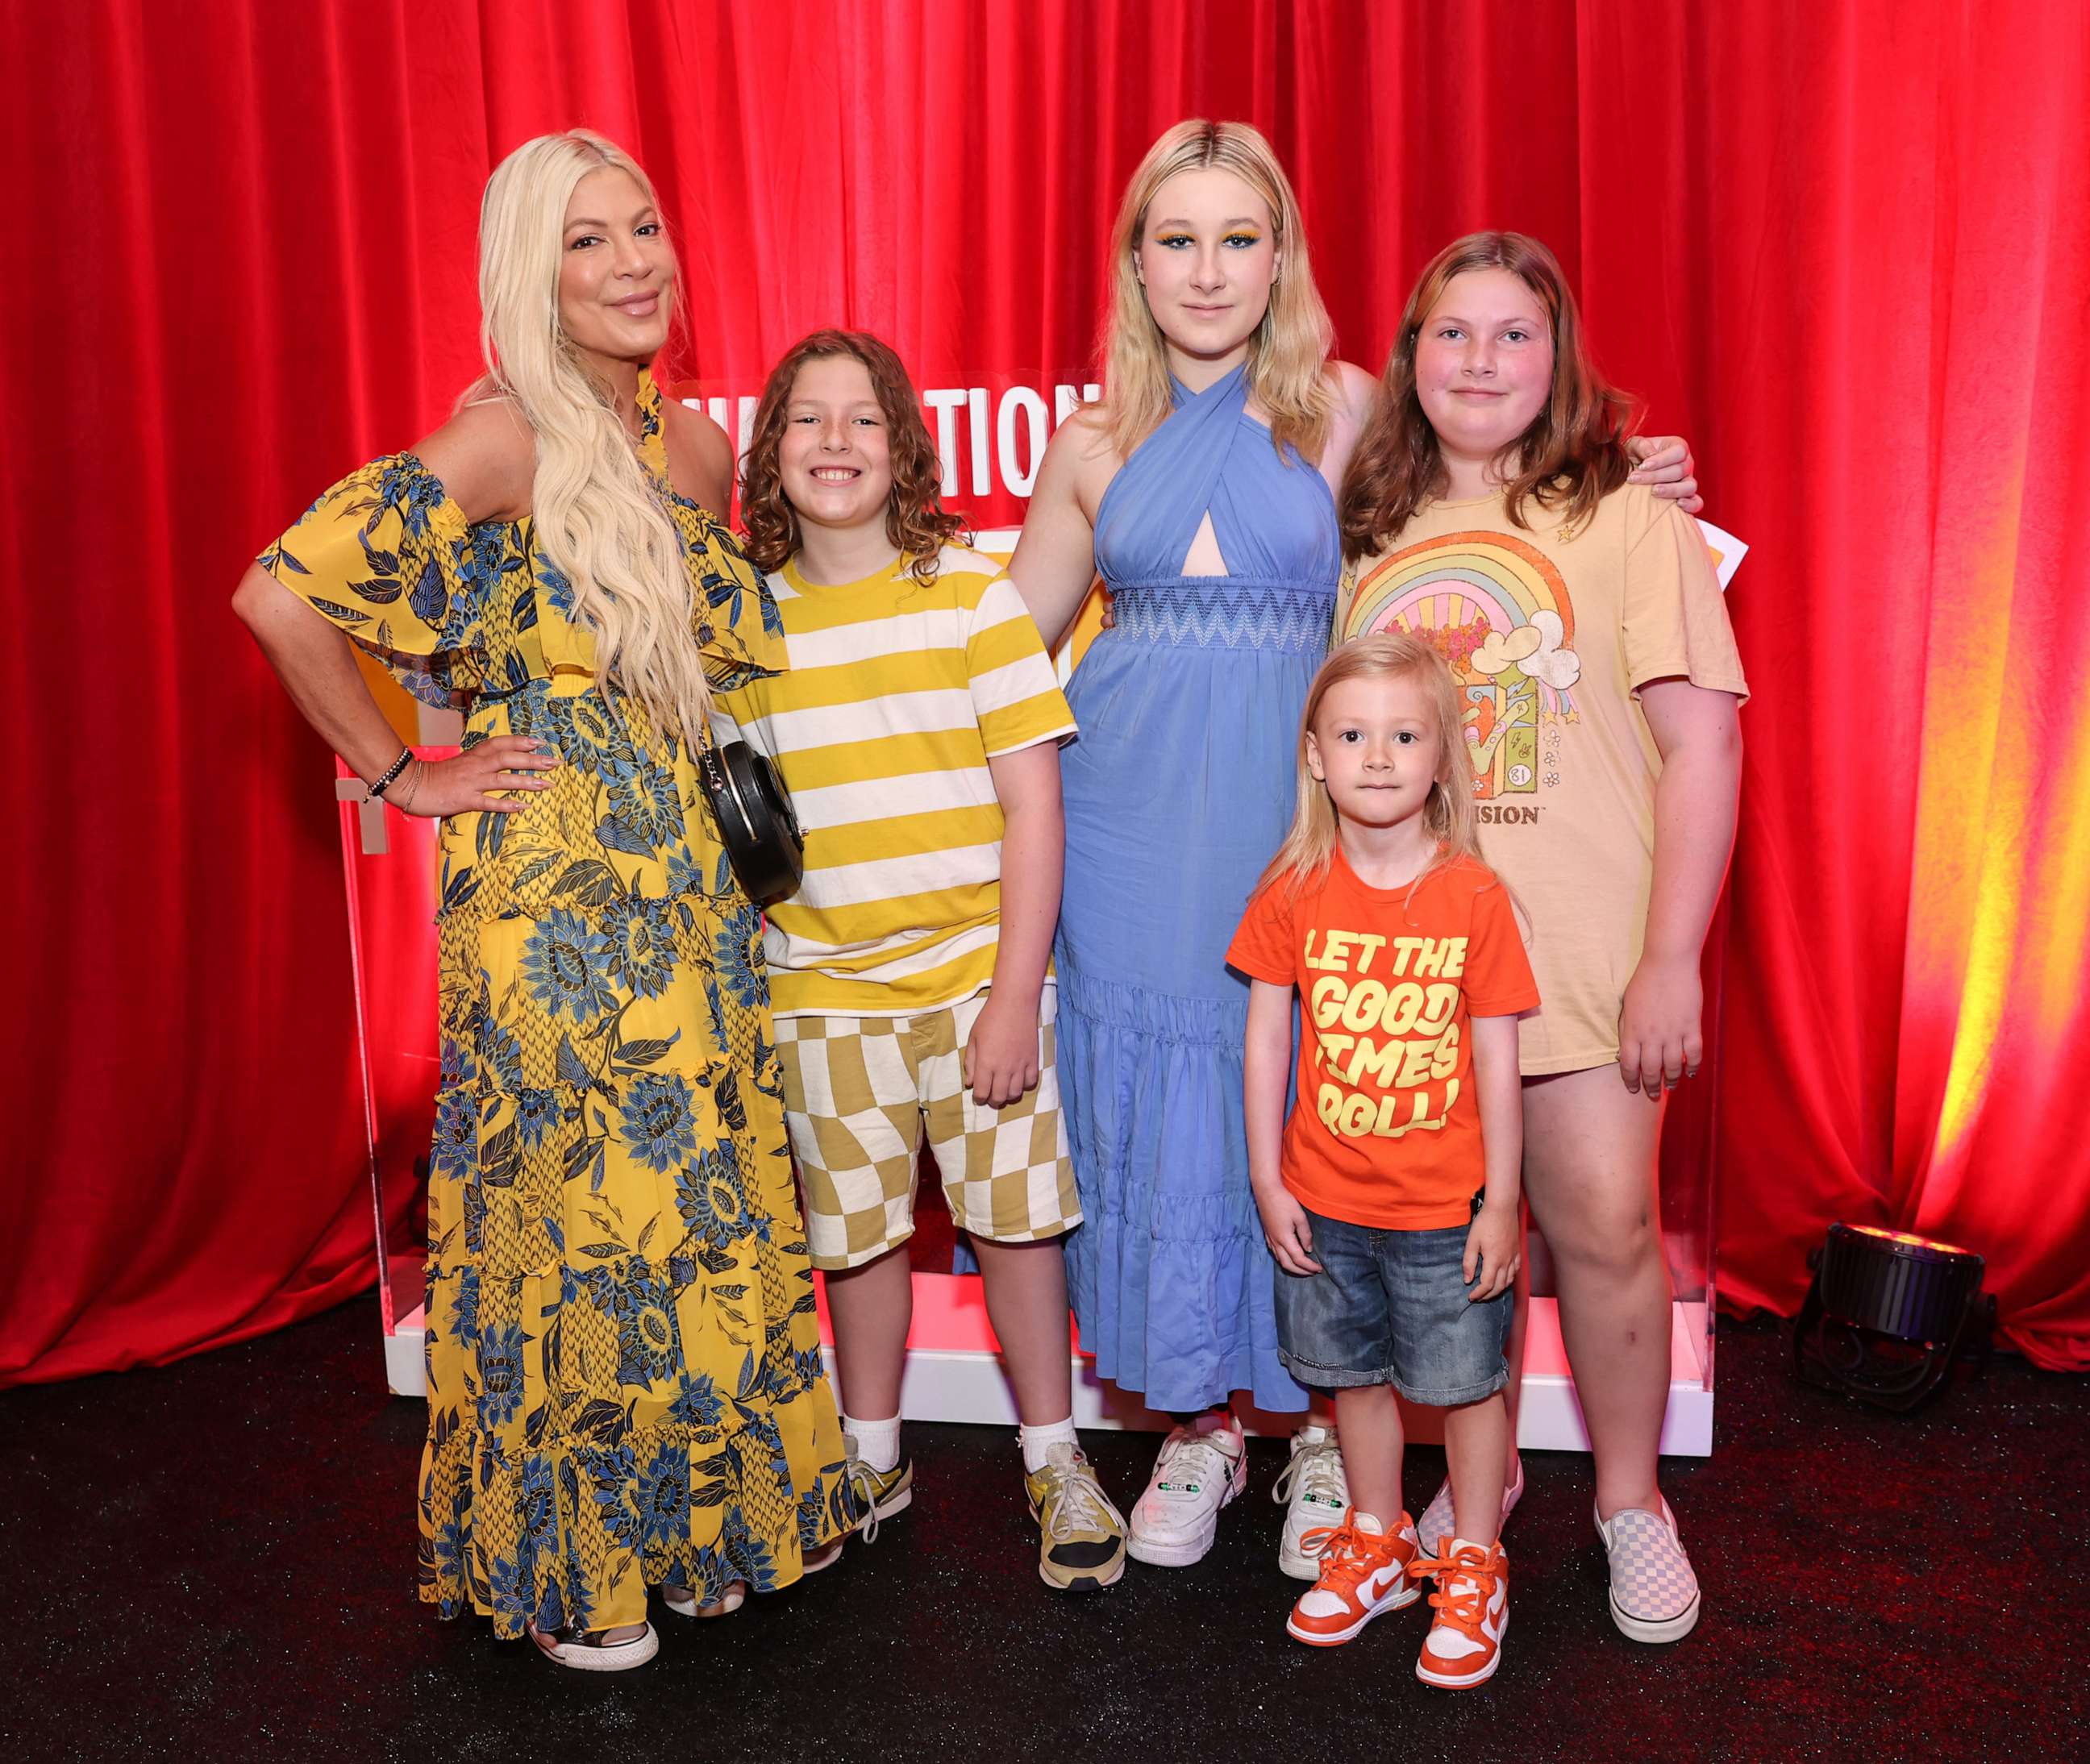 PHOTO: Tori Spelling and family attend the pre-party for Illumination and Universal Pictures' "Minions: The Rise of Gru" Los Angeles premiere on June 25, 2022 in Hollywood, Calif.